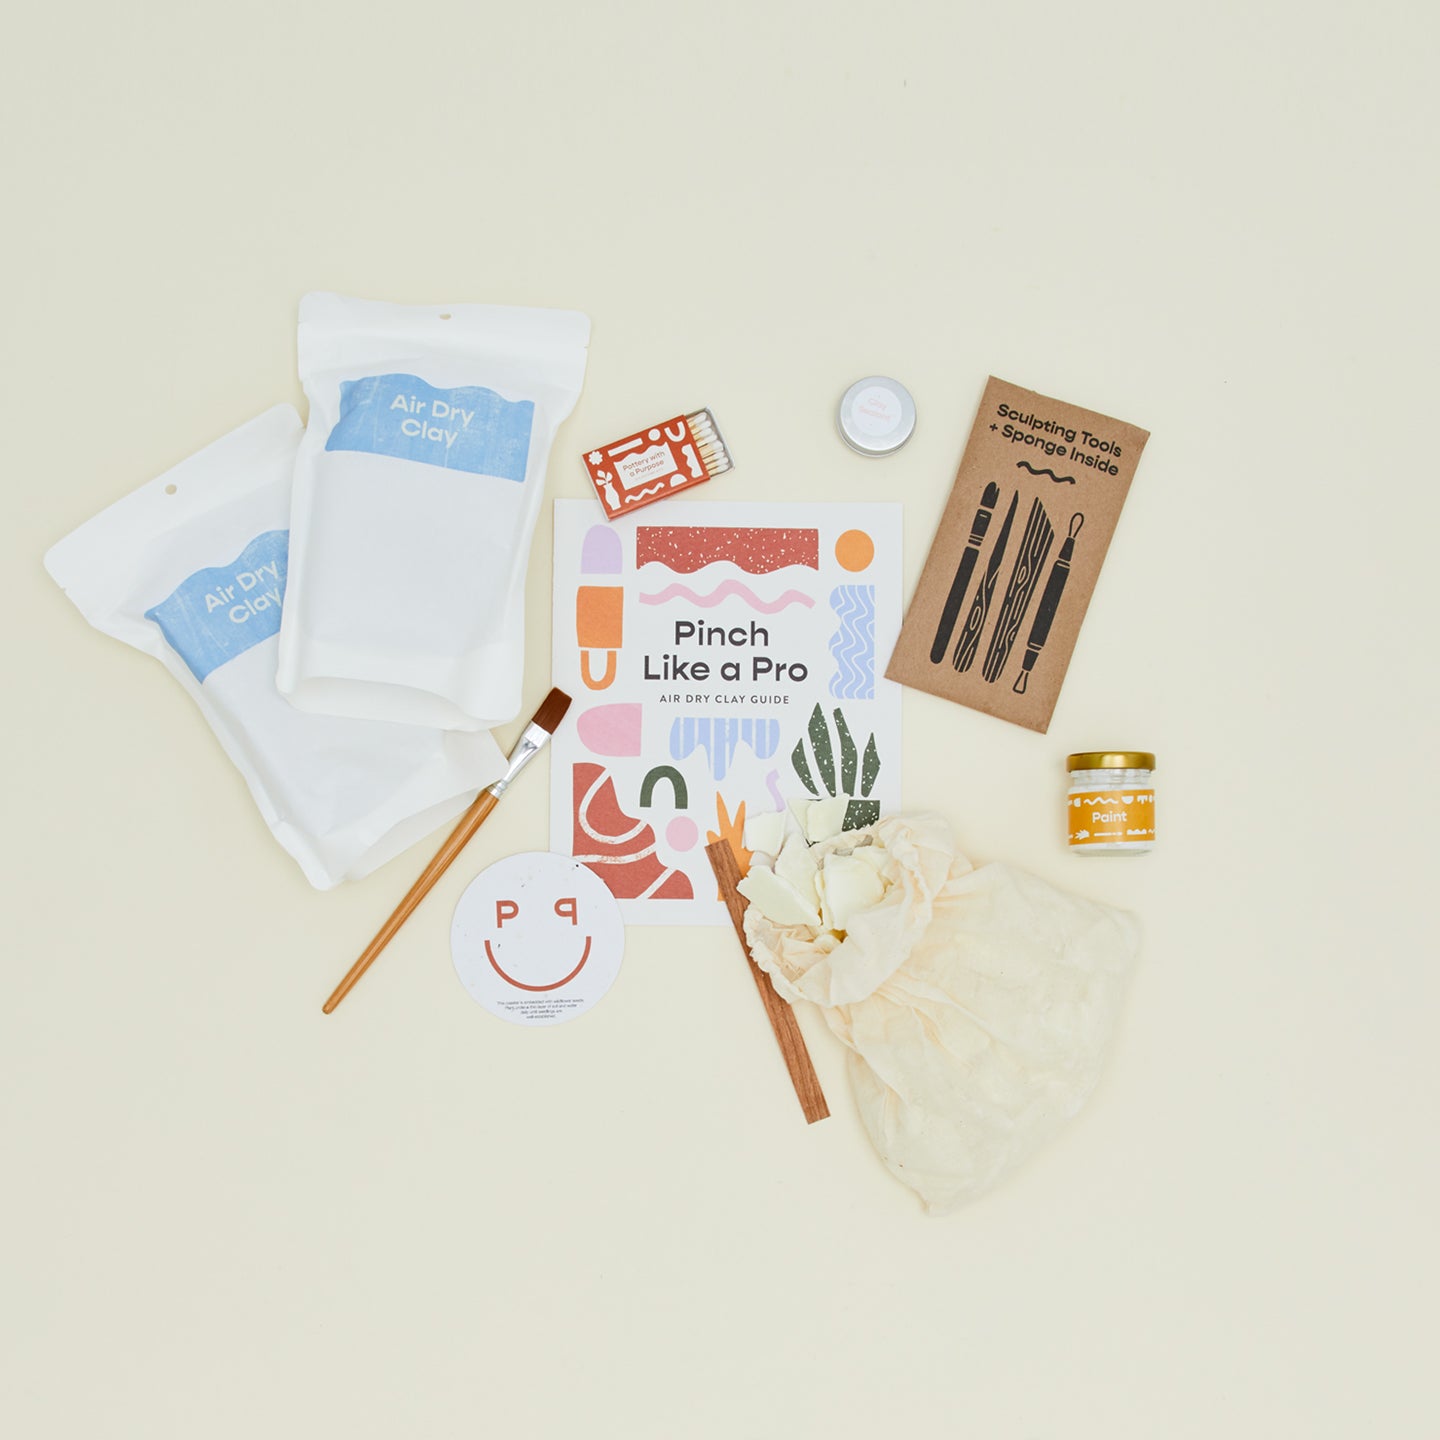 Make your Own Candle Kit